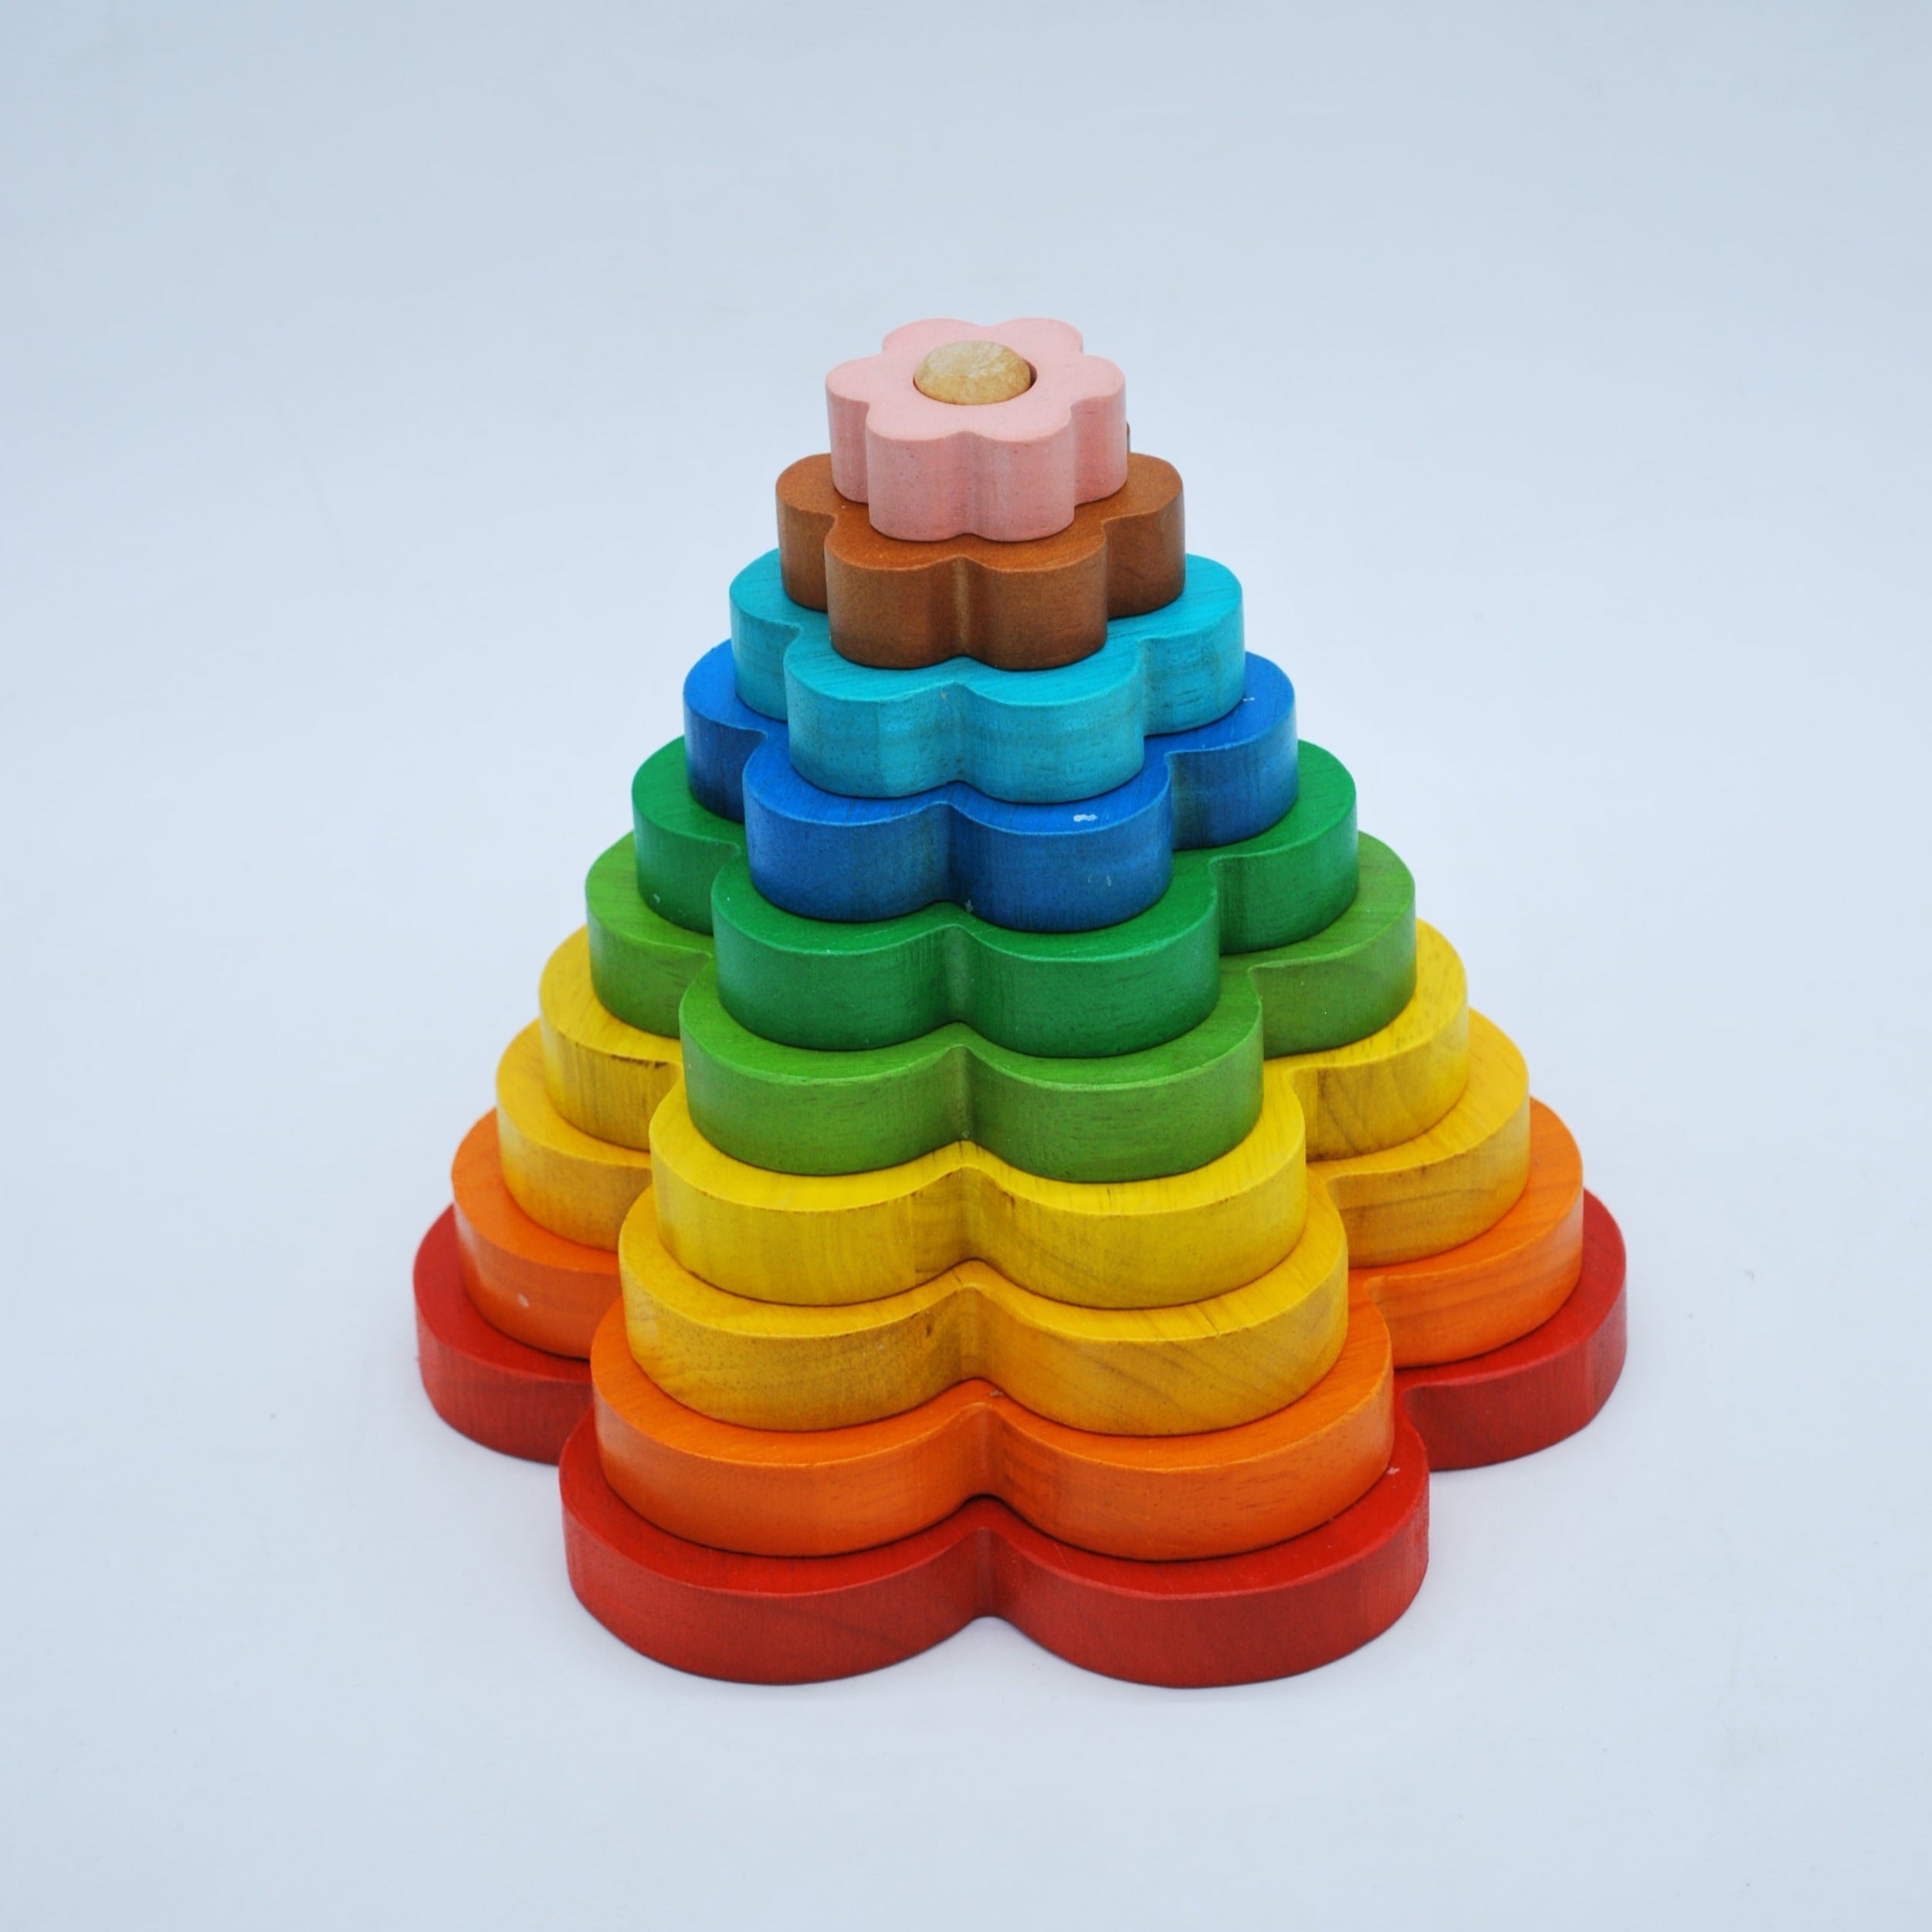 Wooden flower stack toy